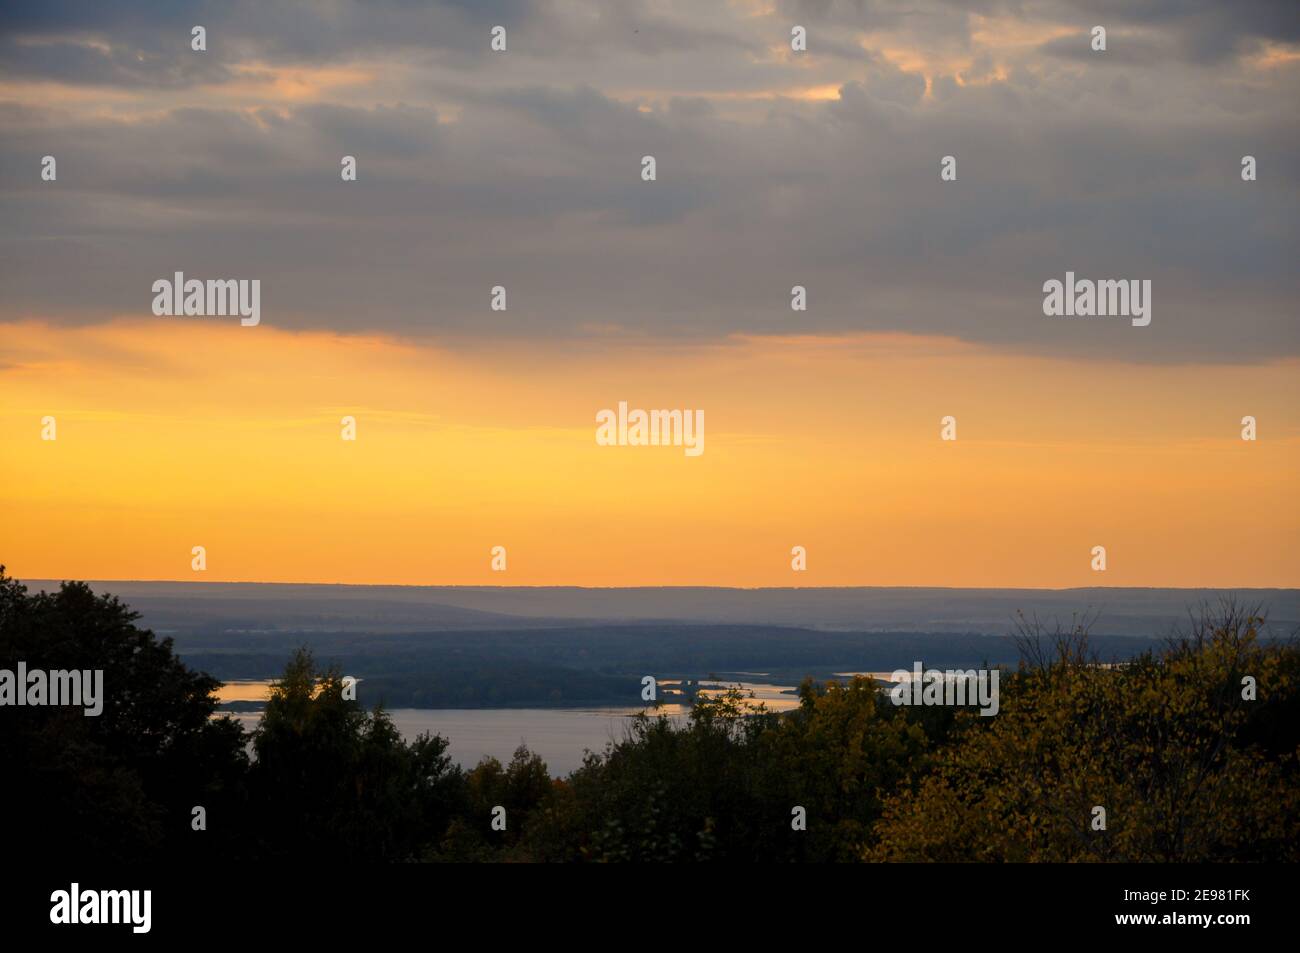 Colorful autumn landscape at sunset, view of the sunlit hills, the river below and the misty distance on the horizon Stock Photo